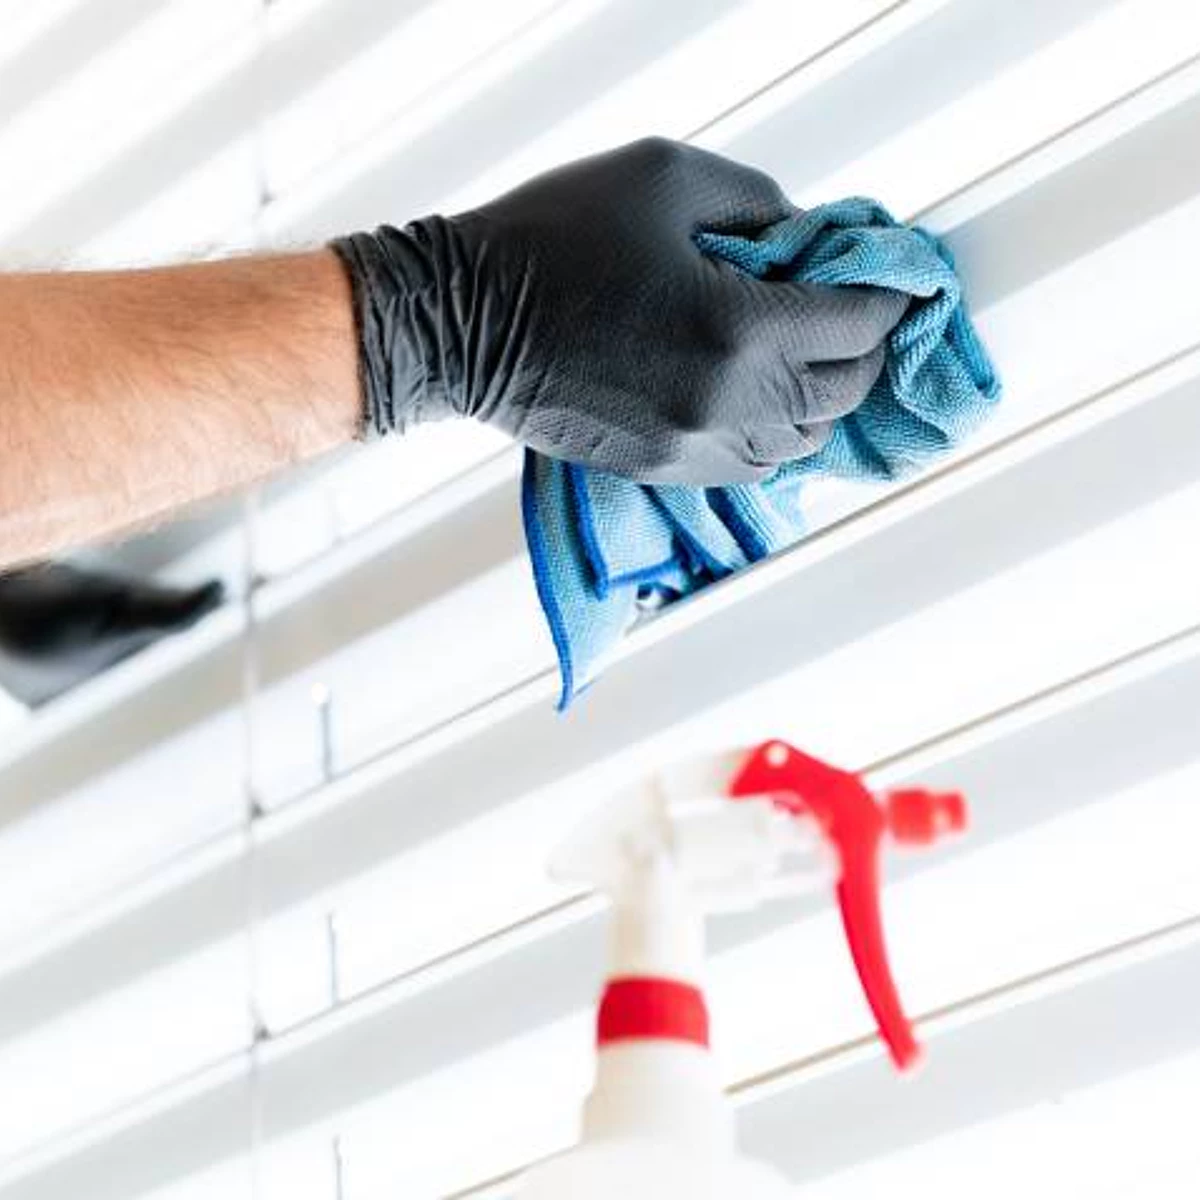 While wearing gloves, we spray cleaning solution onto window blinds, paying close attention to the process of cleaning the window shade.